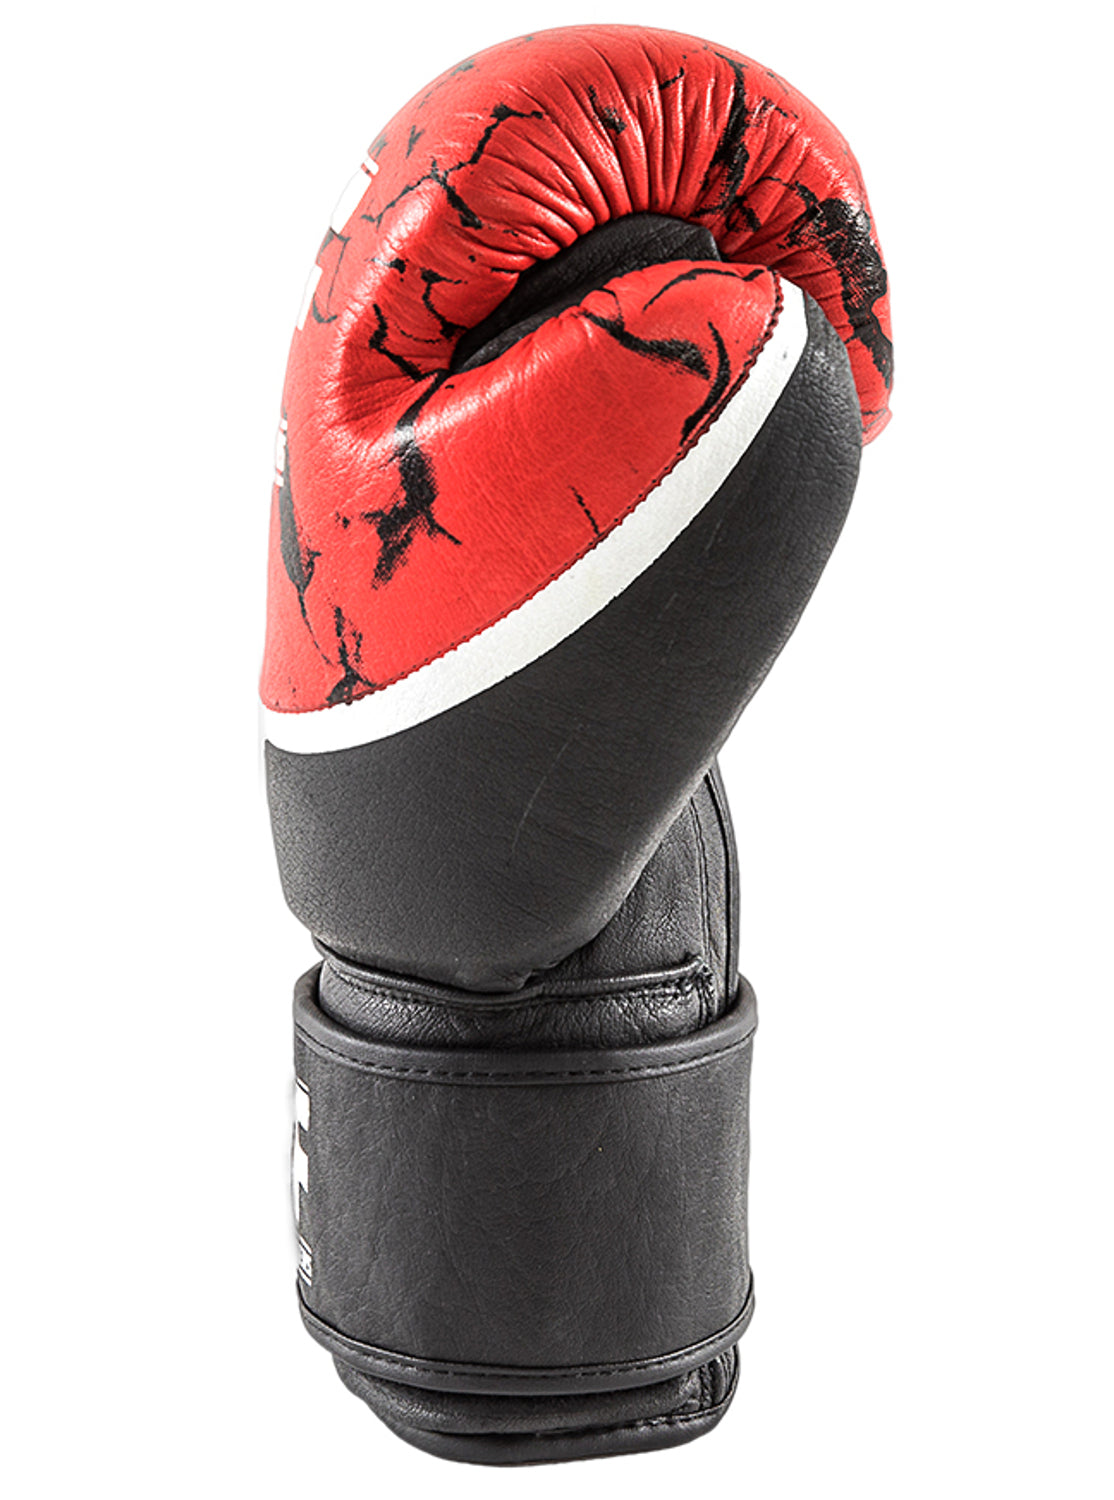 G4F Earth Original Nappa Leather Red Kick Boxing Gloves